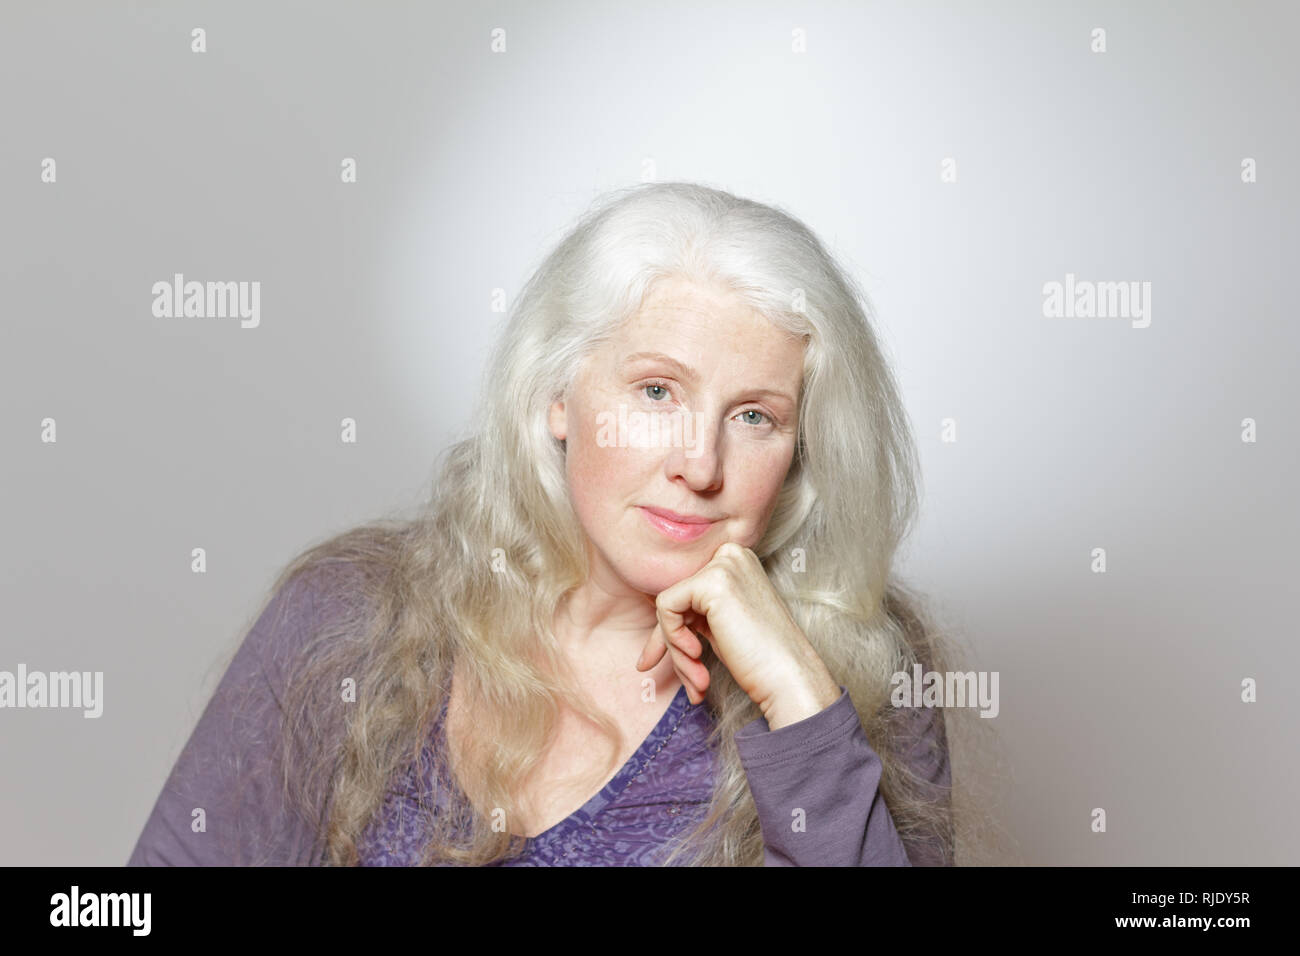 Headshot of a mature woman with beautiful curly long gray hair in front of white background, copy space. Stock Photo